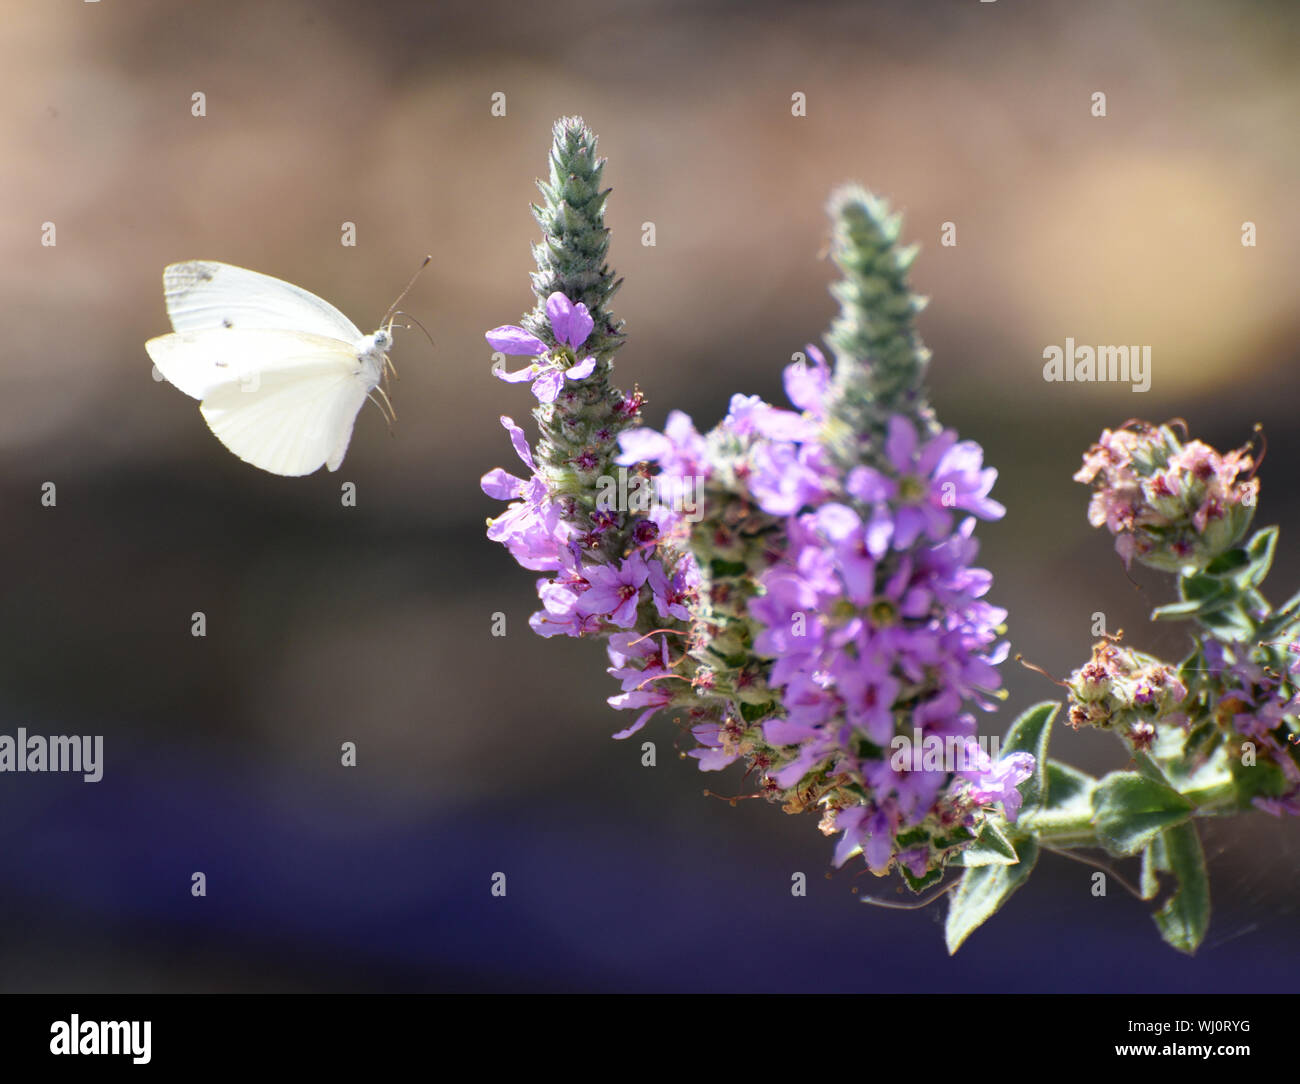 Selective focus of a Large White or Cabbage White (Pieris brassicae) Butterfly on a purple lavender flower Photographed in Israel, in August Stock Photo